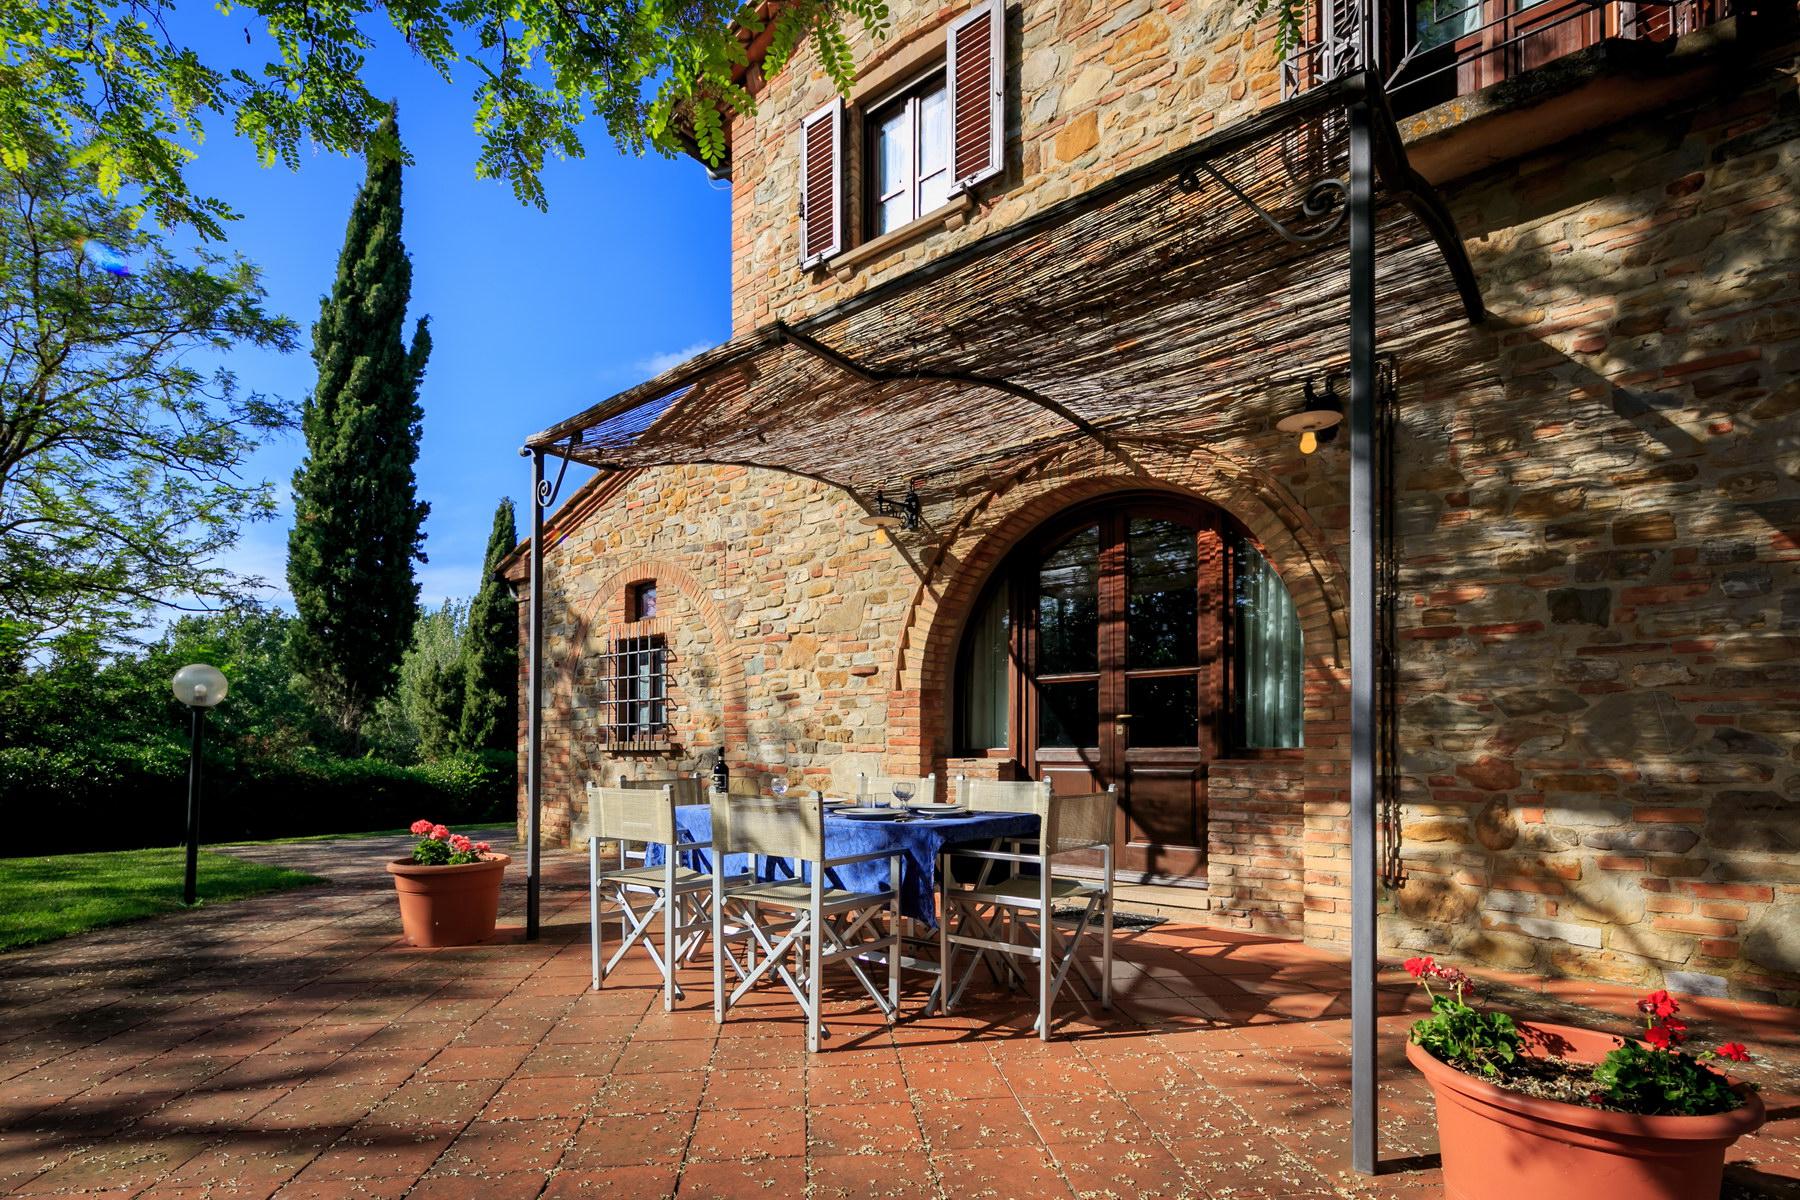 Wonderful countryhouse in the tuscan countryside - 4